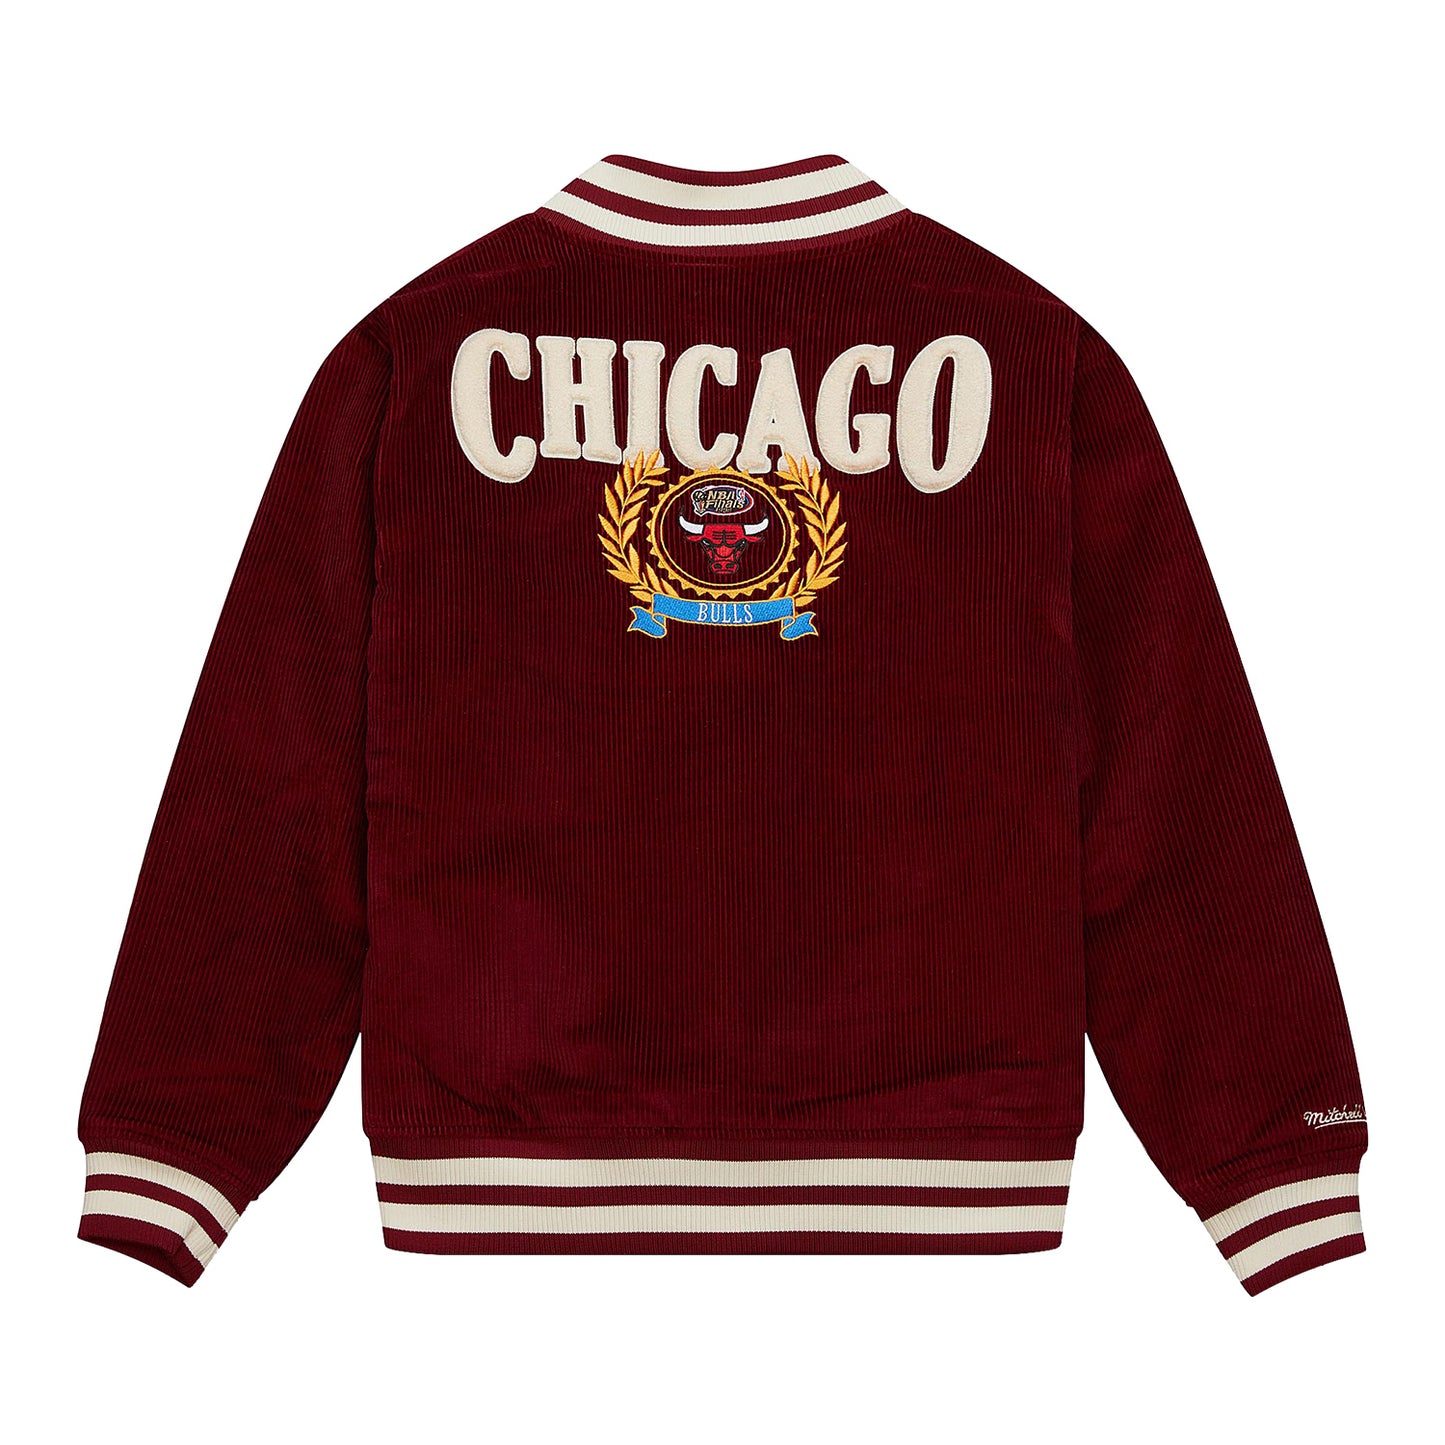 Chicago Bulls Mitchell & Ness Collegiate Varsity Jacket in red - back view